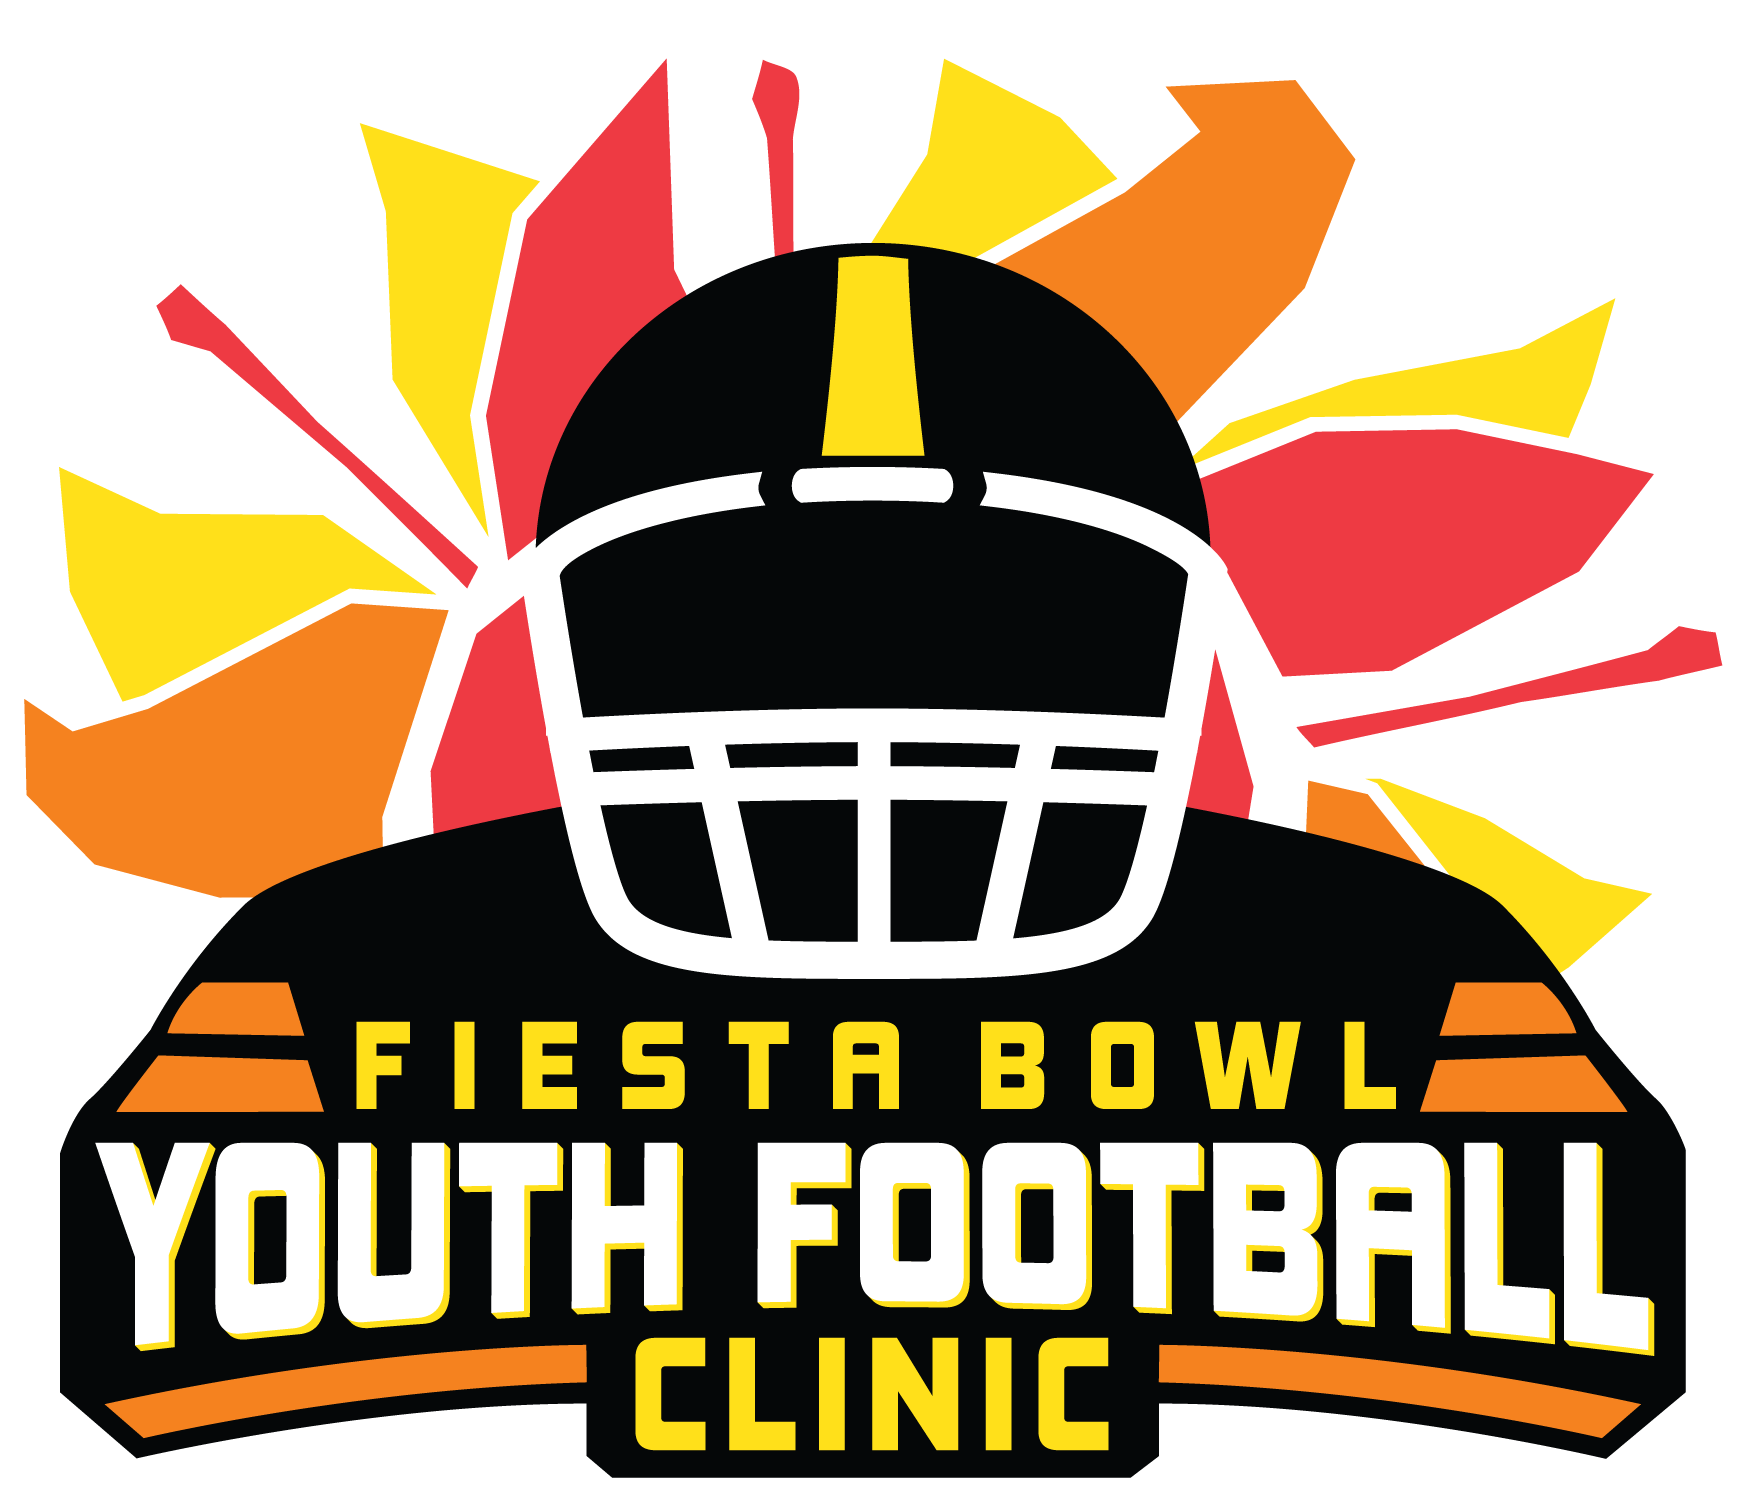 Fiesta Bowl Youth Football Clinic - Fiesta Bowl (1836x1551), Png Download